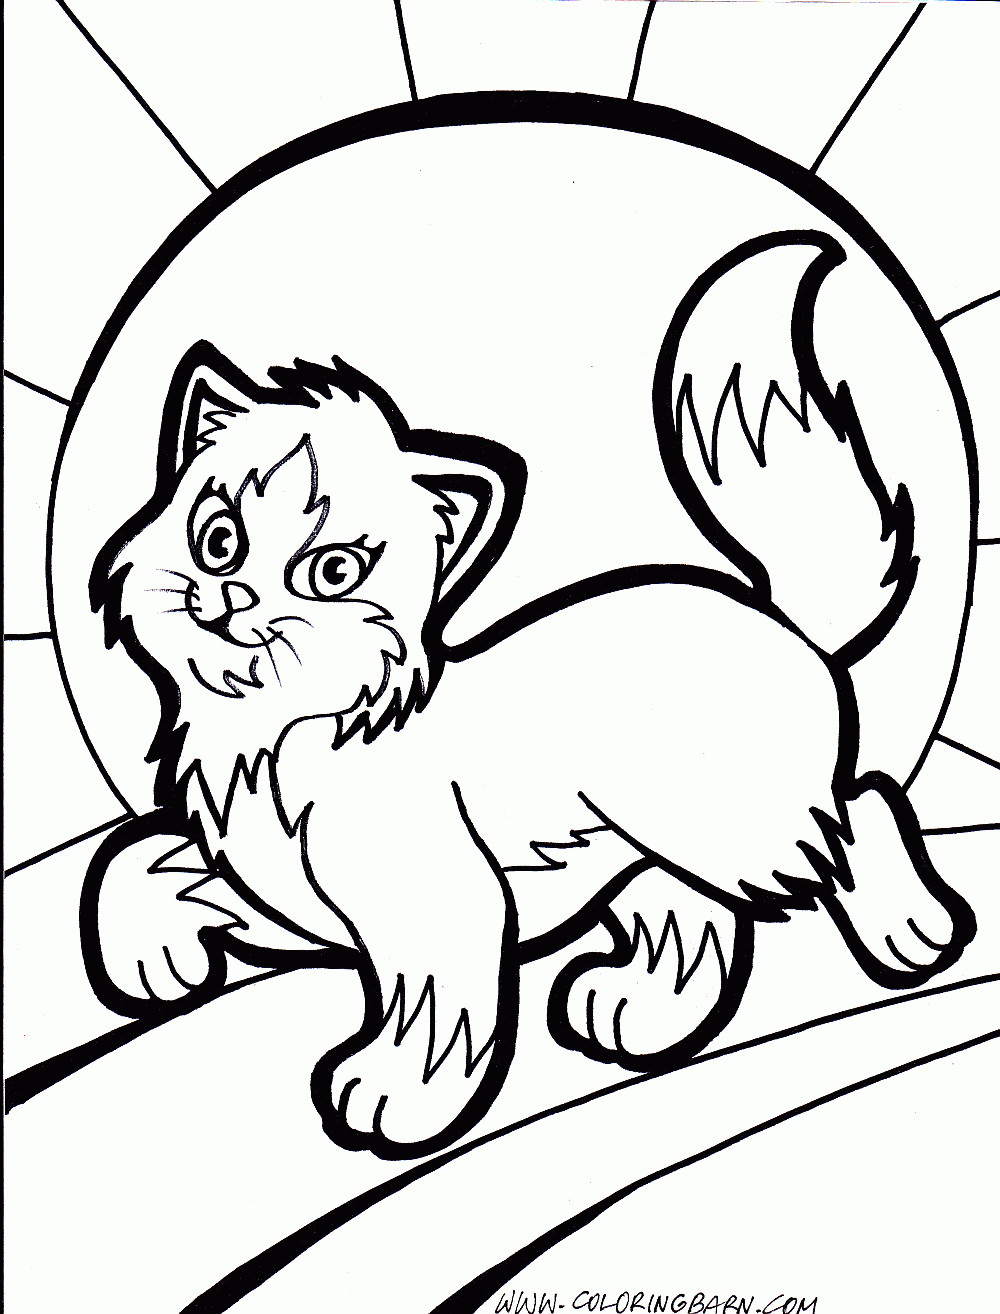 Printable Cat Coloring Pages For Kids
 Coloring Pages for Kids Cat Coloring Pages for Kids